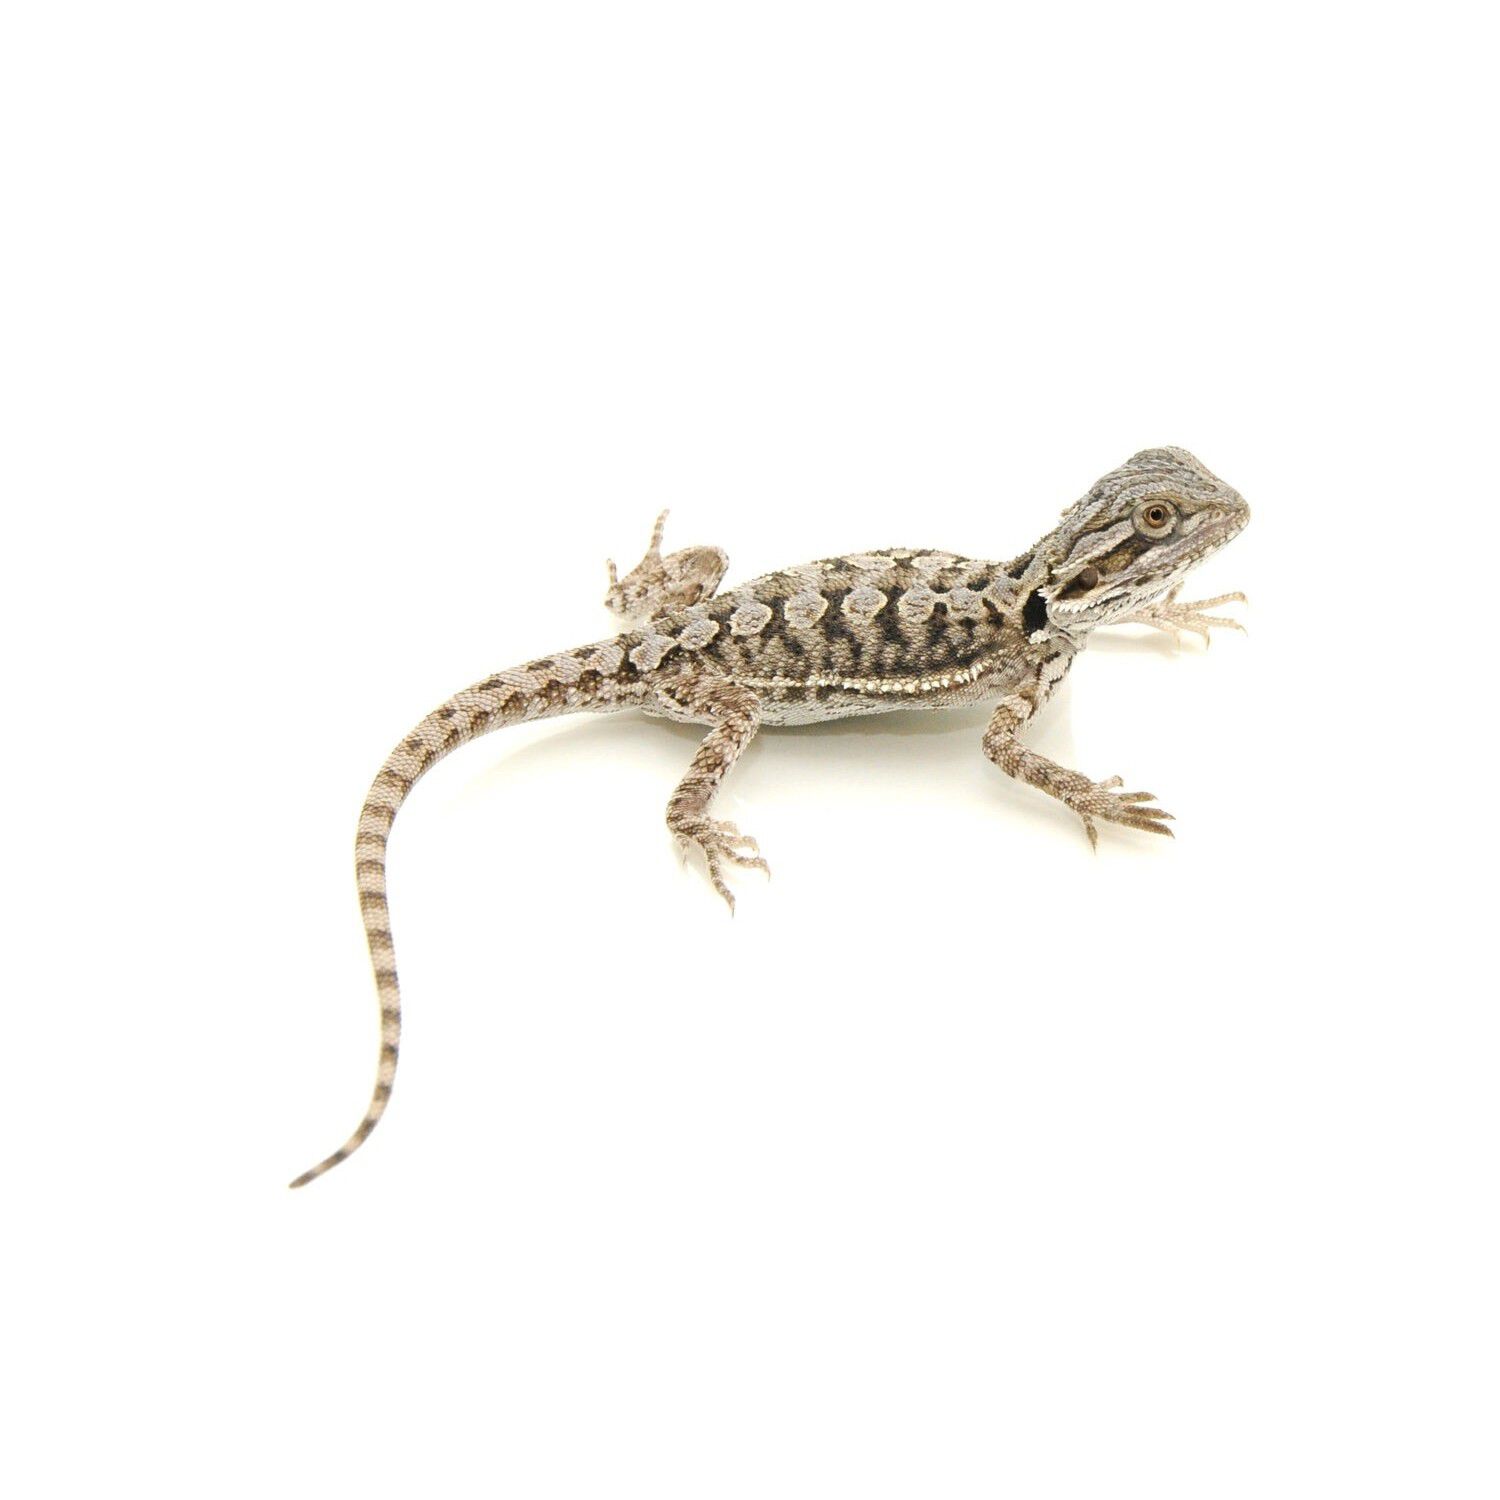 30% Off All Bearded Dragons In-Store Only